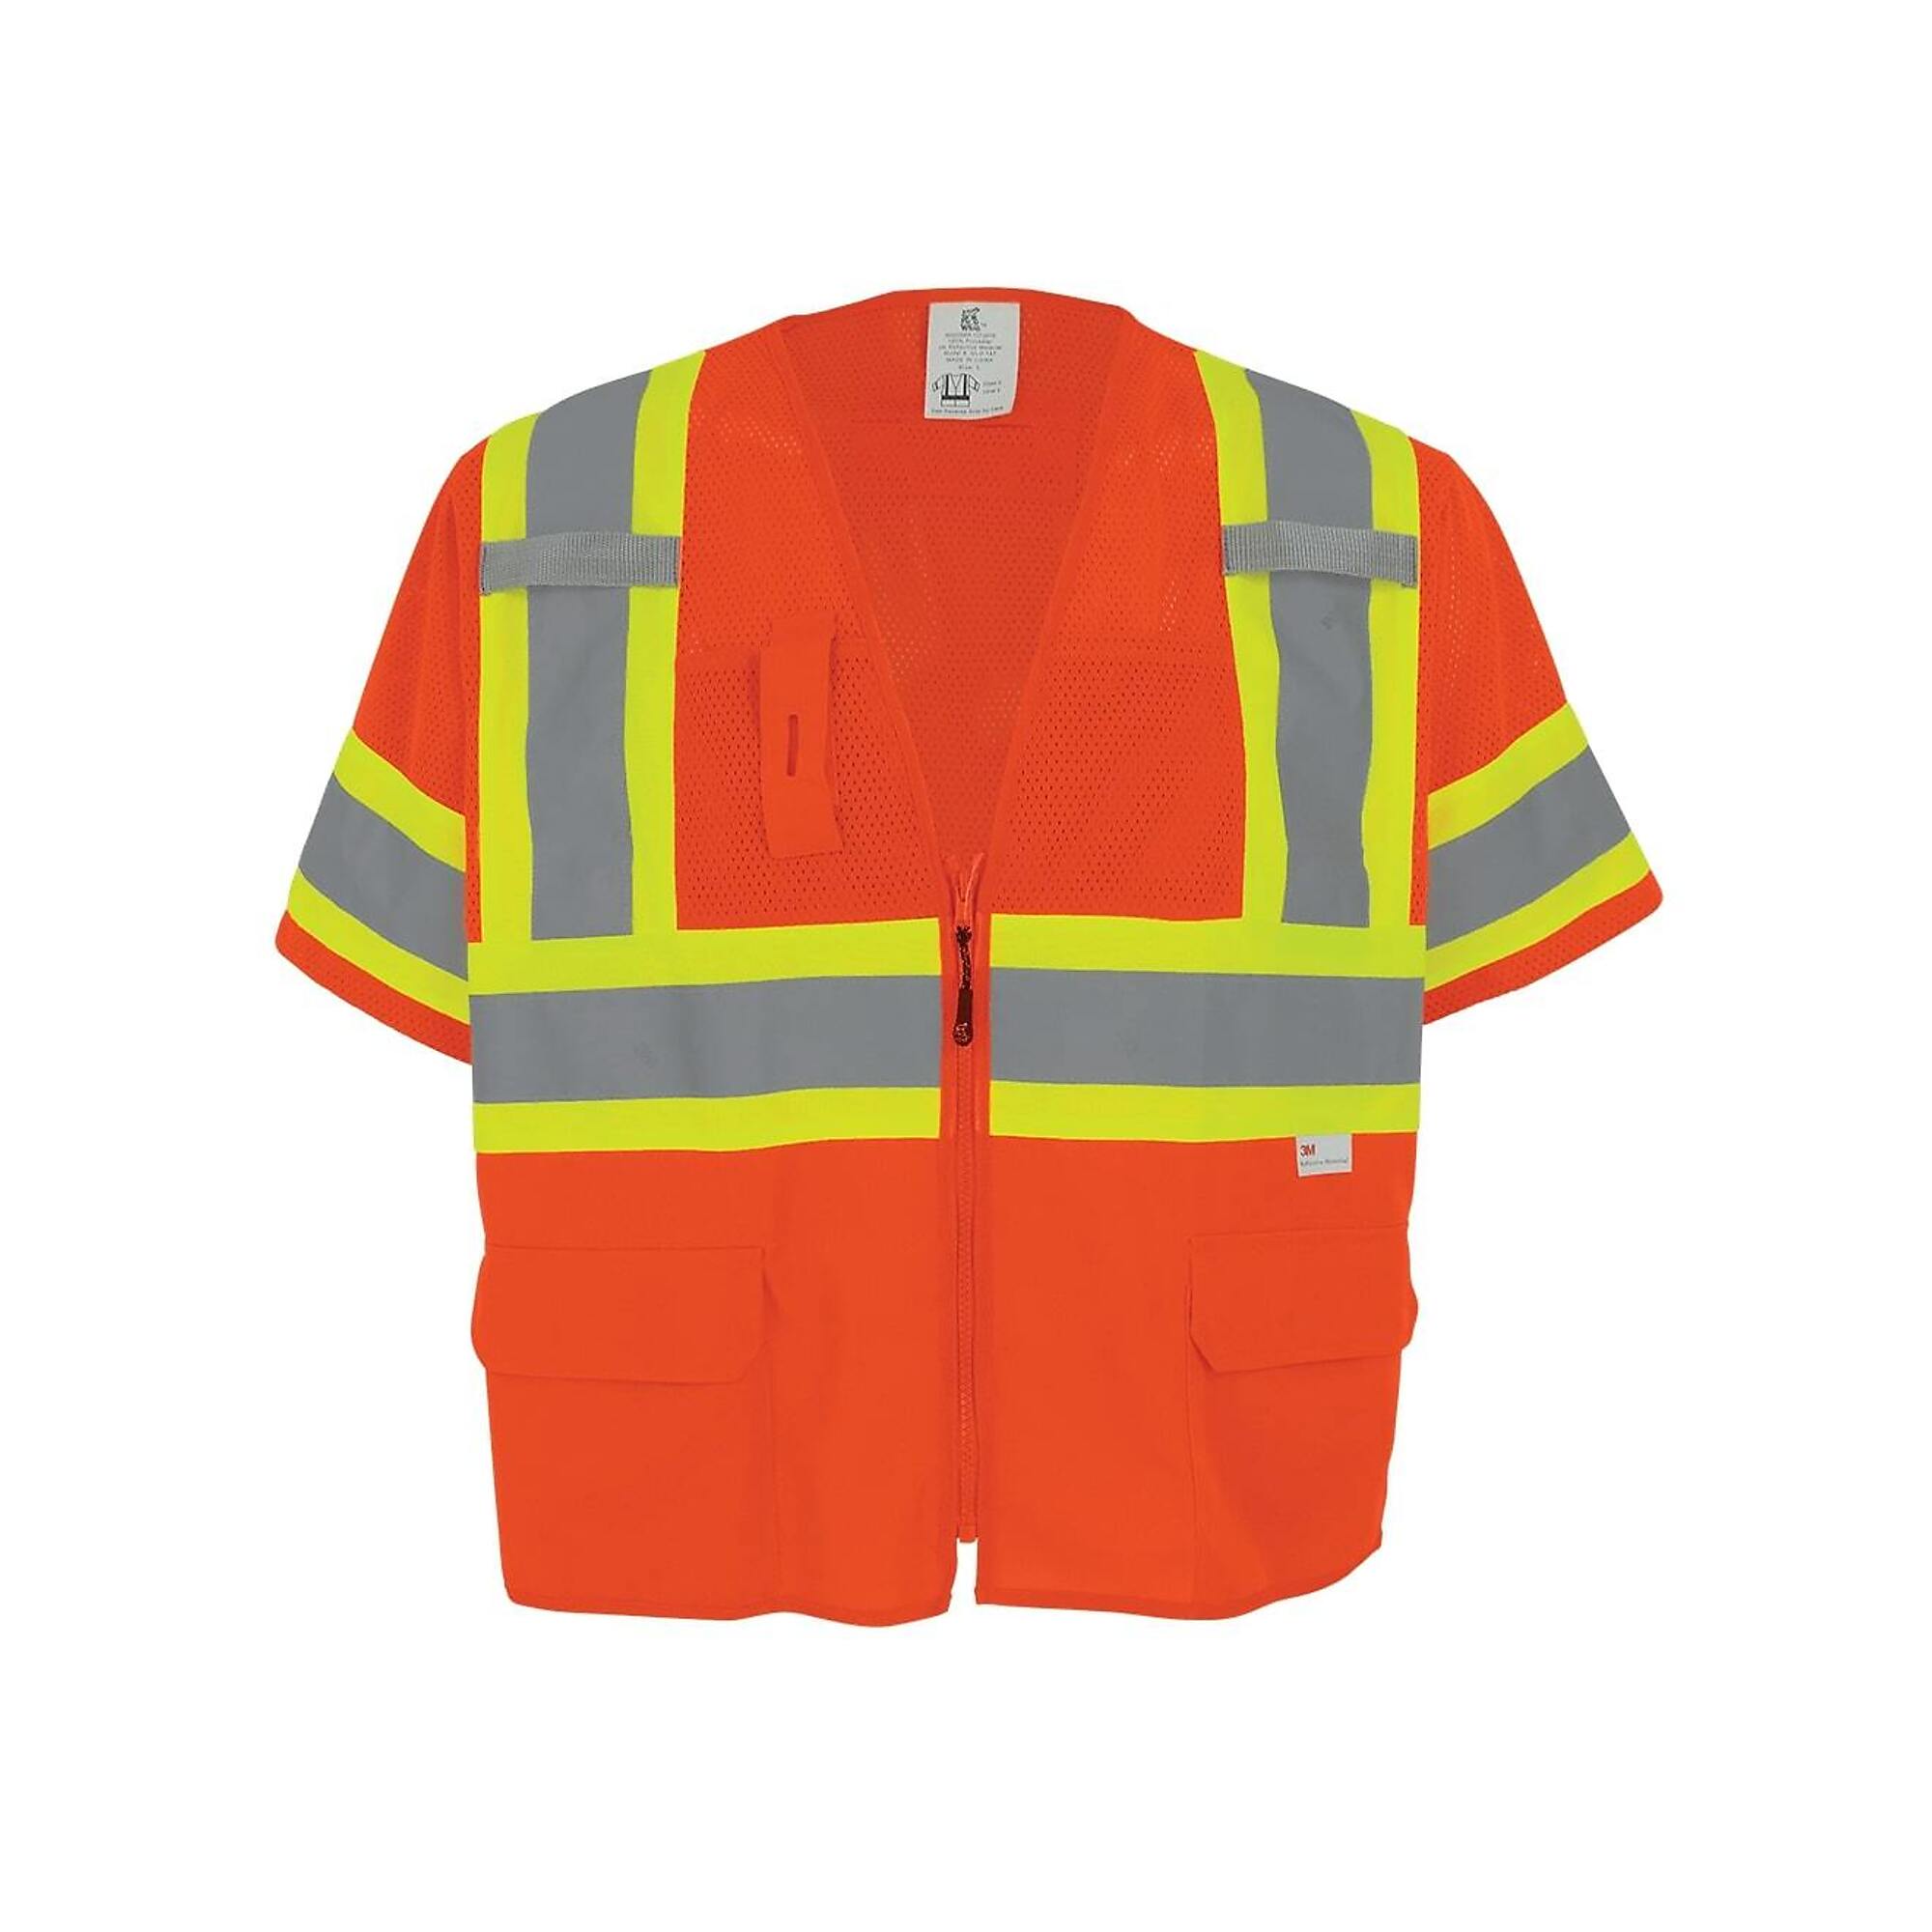 FrogWear, HV Orange, Class 3 6 Pockets, With Sleeves Solid/Mesh Vest, Size 2XL, Color High-Visibility Orange, Model GLO-147-2XL